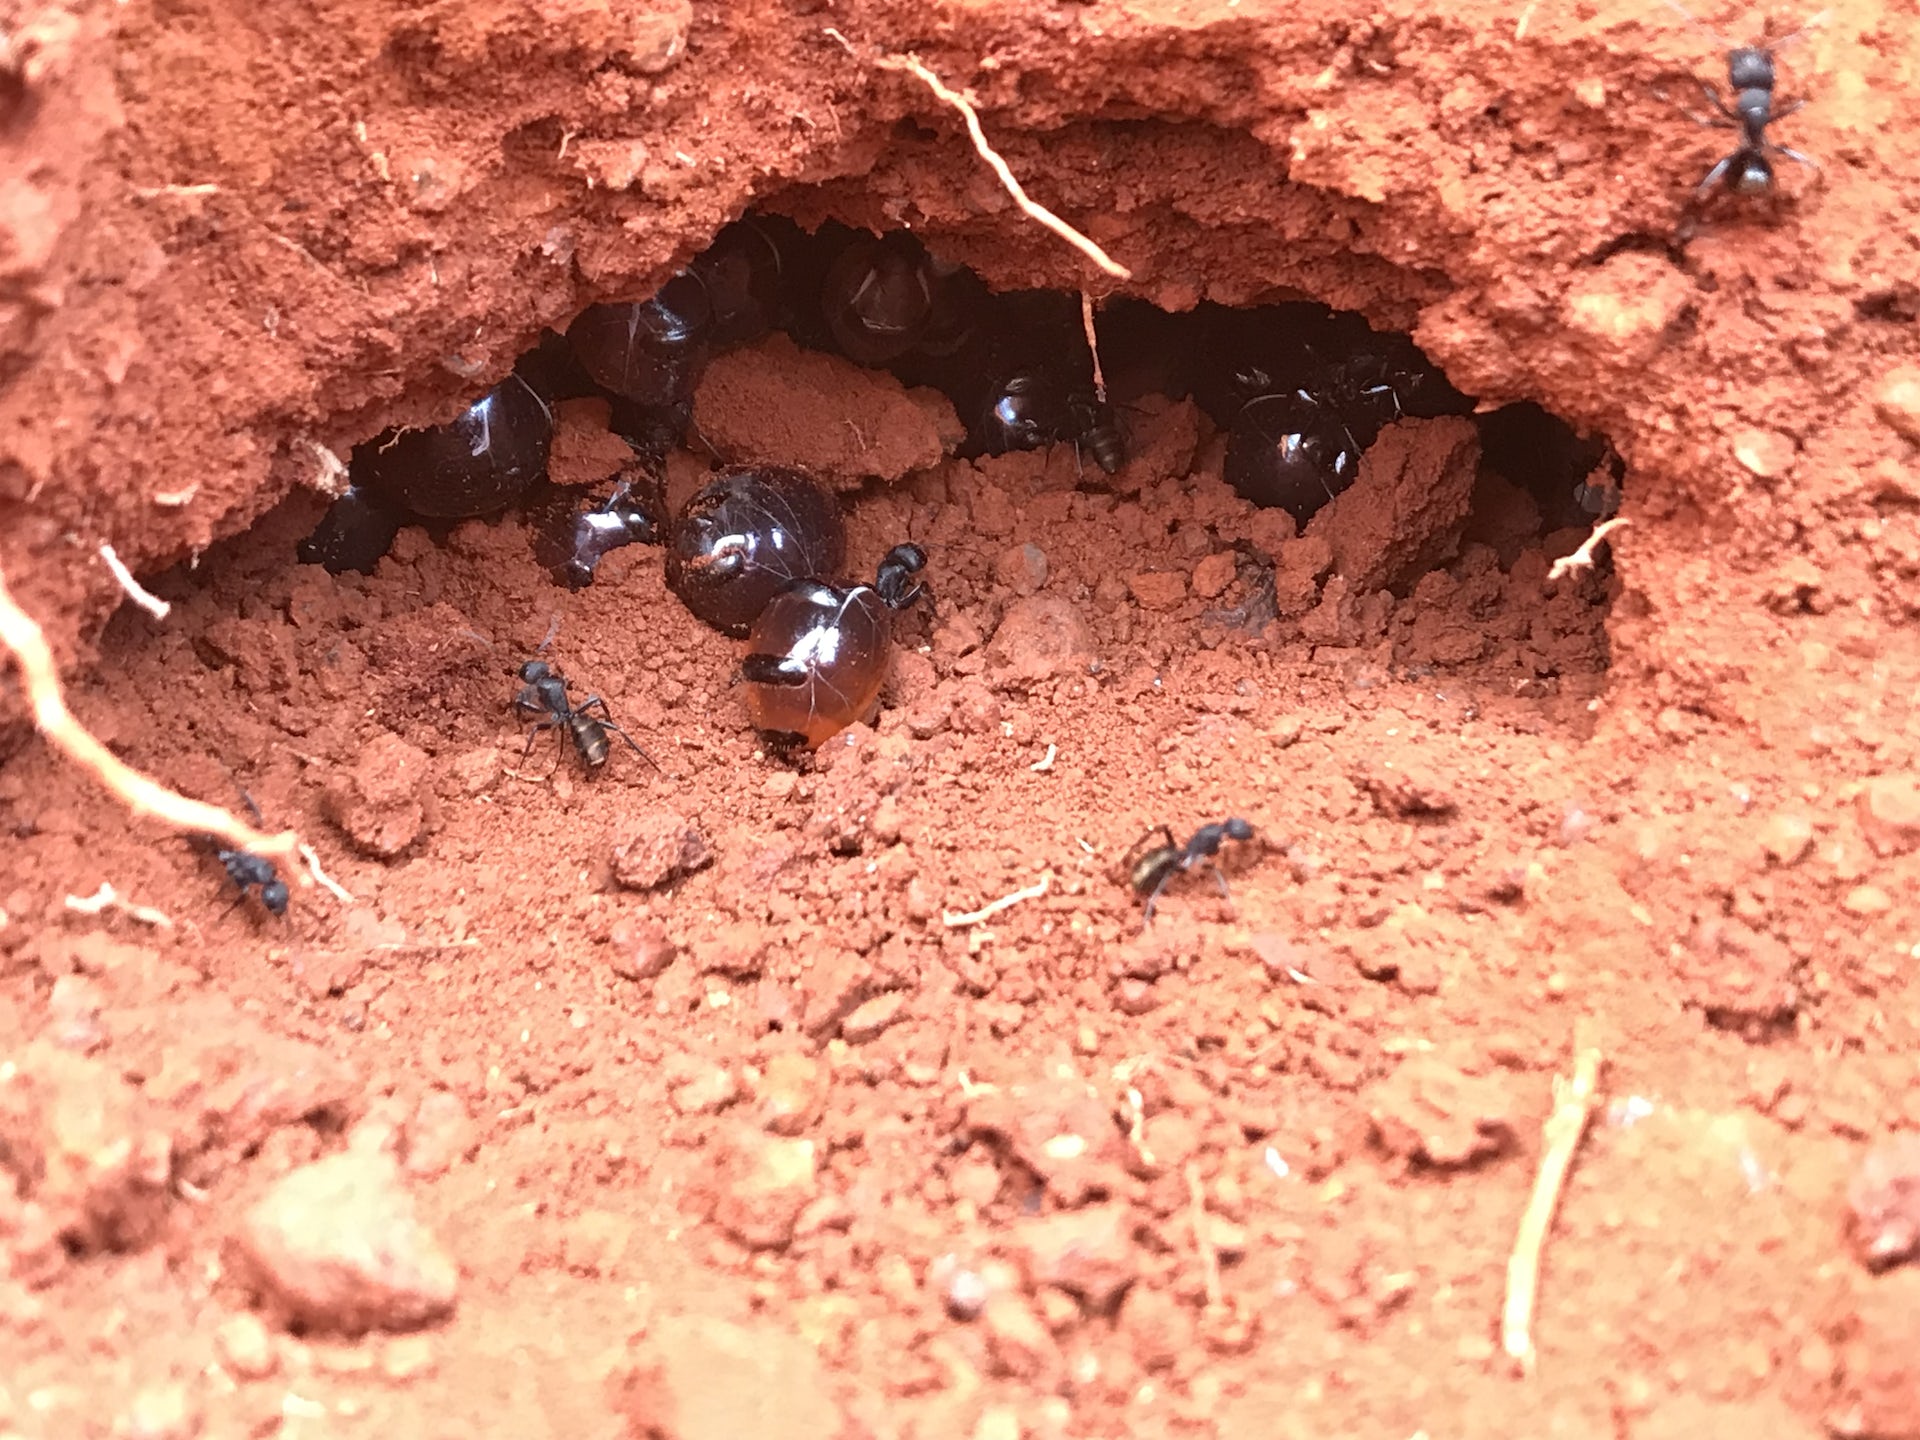 New research reveals that Australian ant honey effectively inhibits resilient pathogens